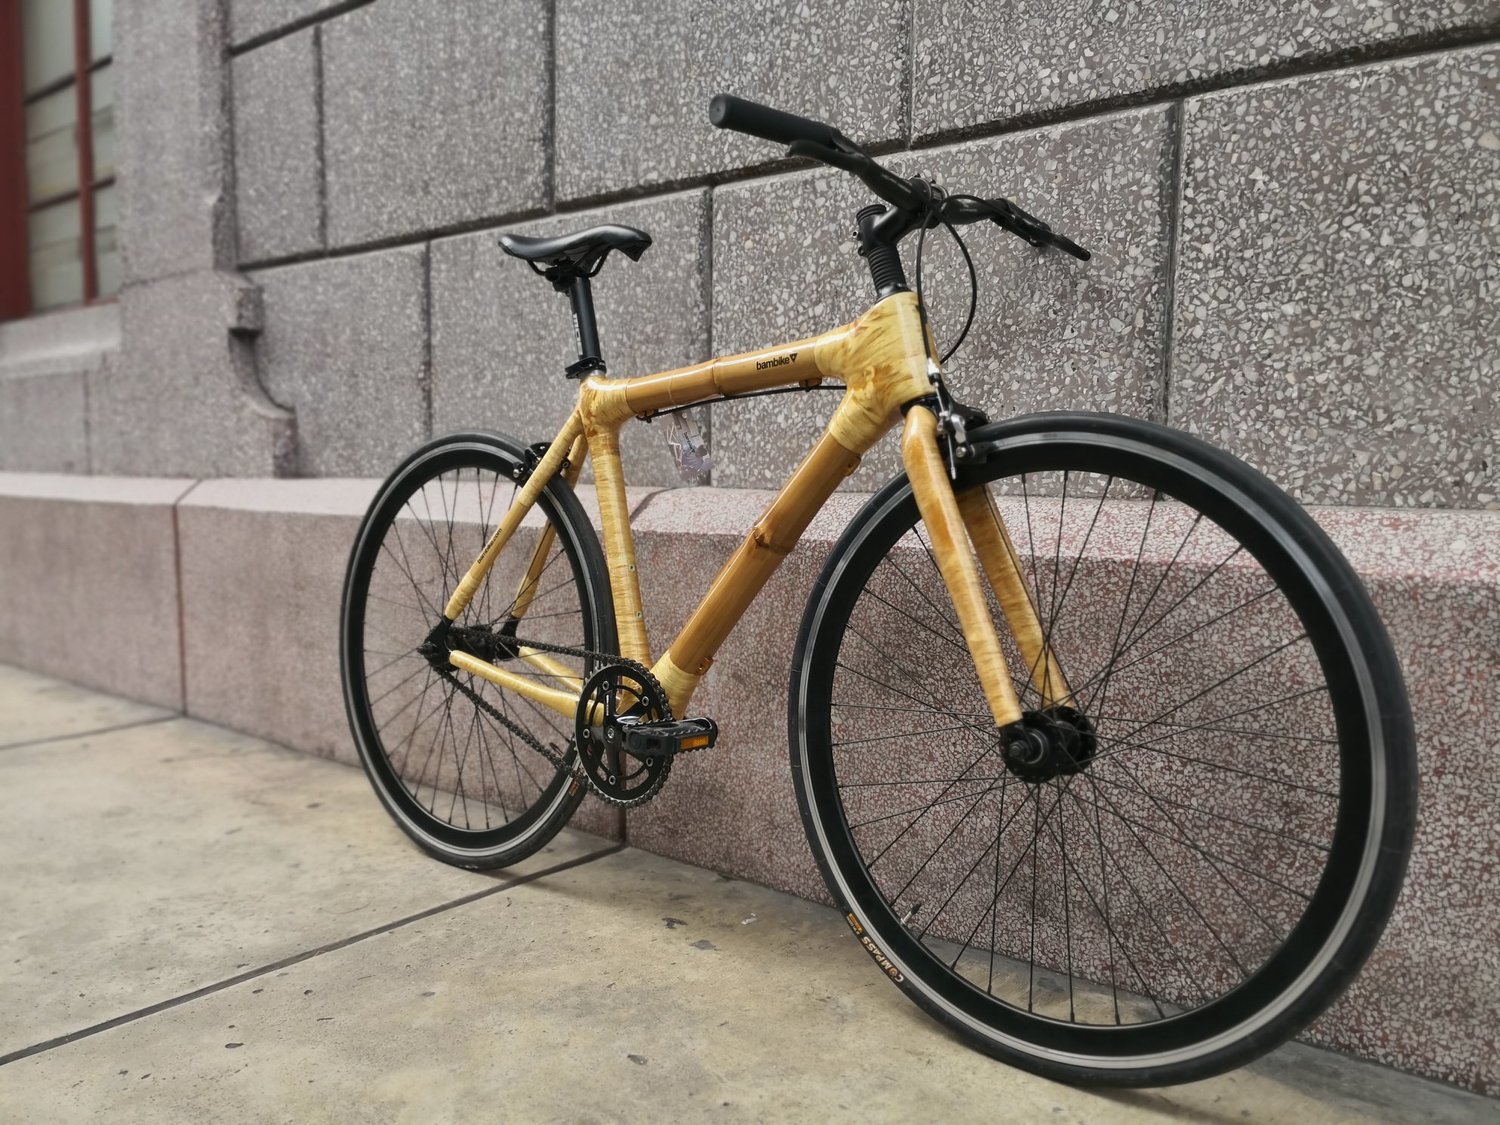 A bamboo bike from the brand Bambike